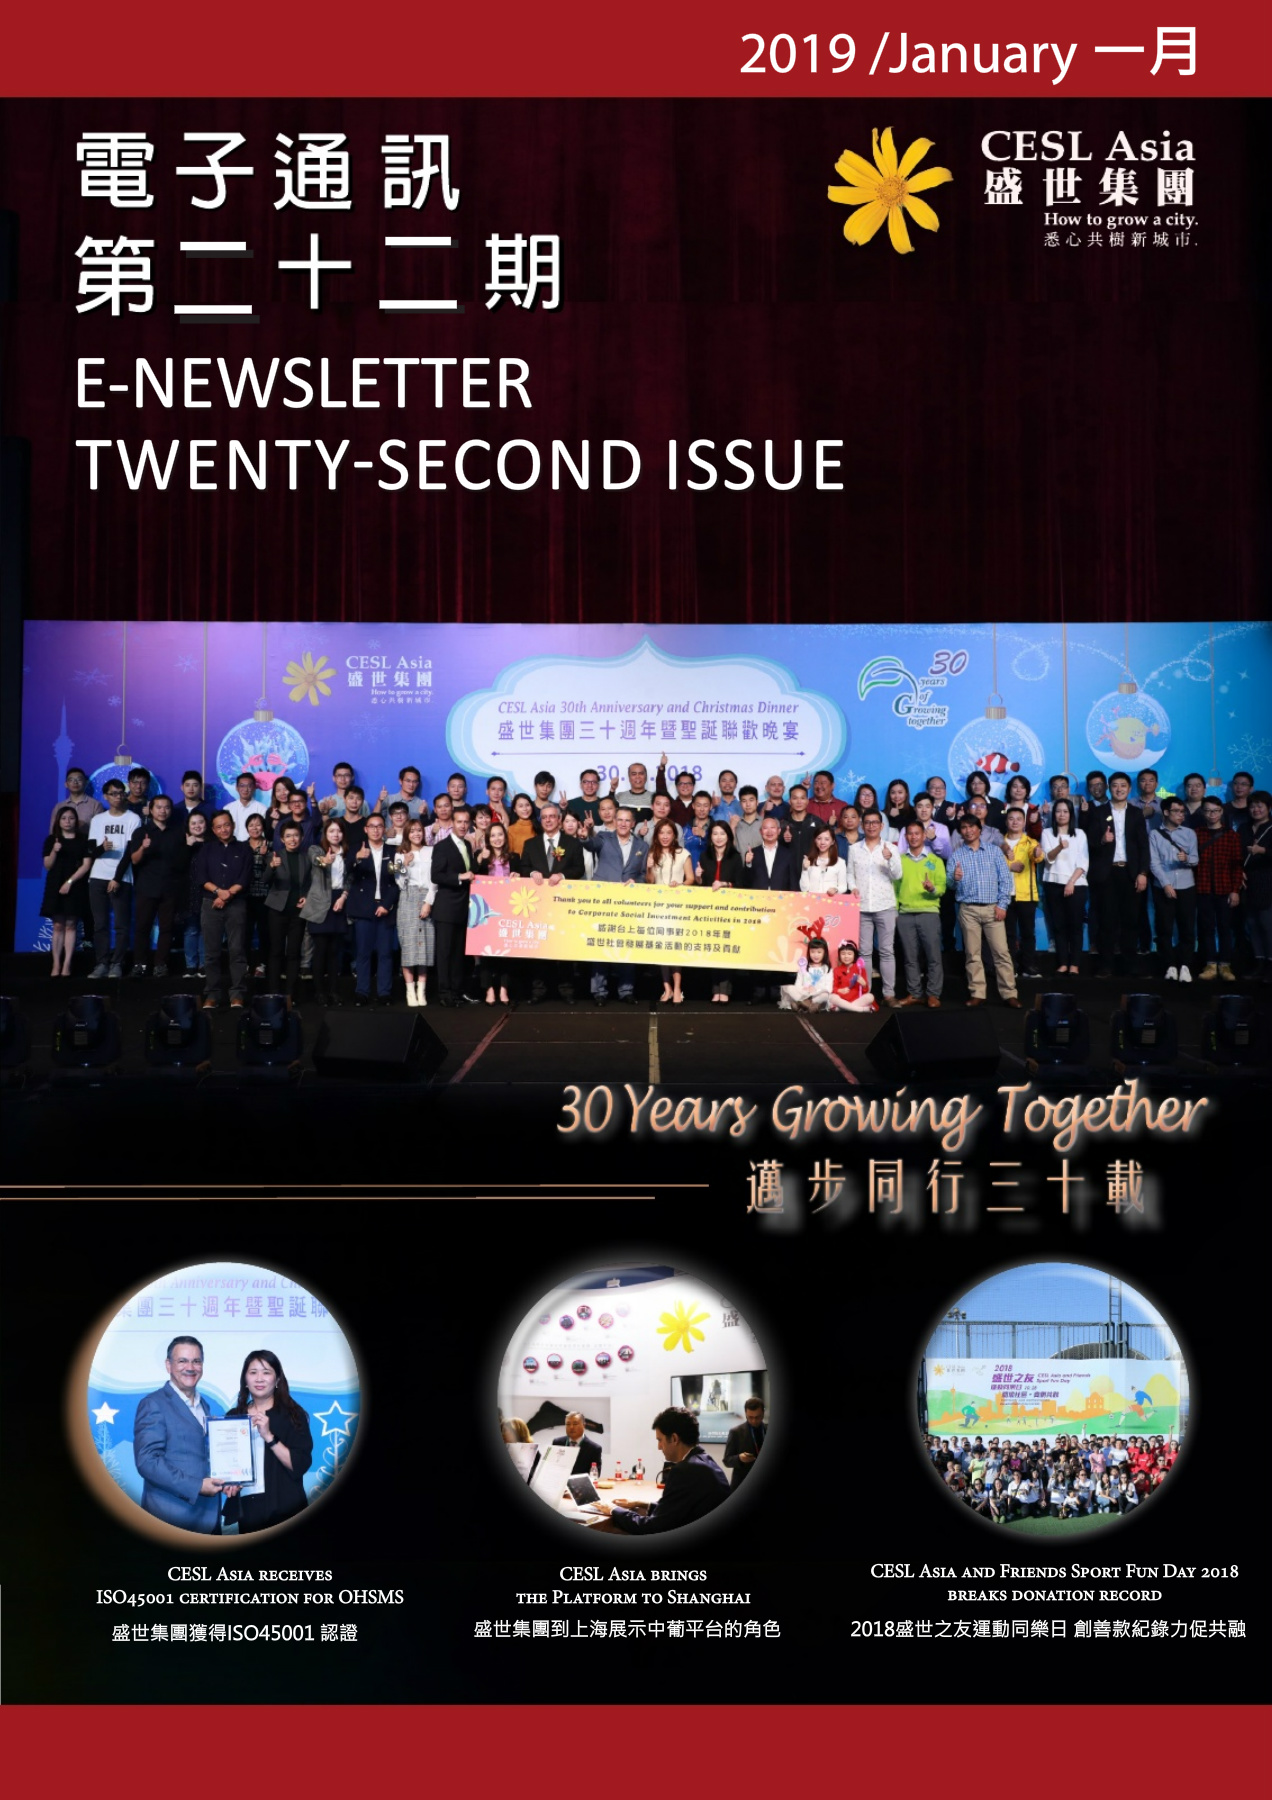 22nd Issue